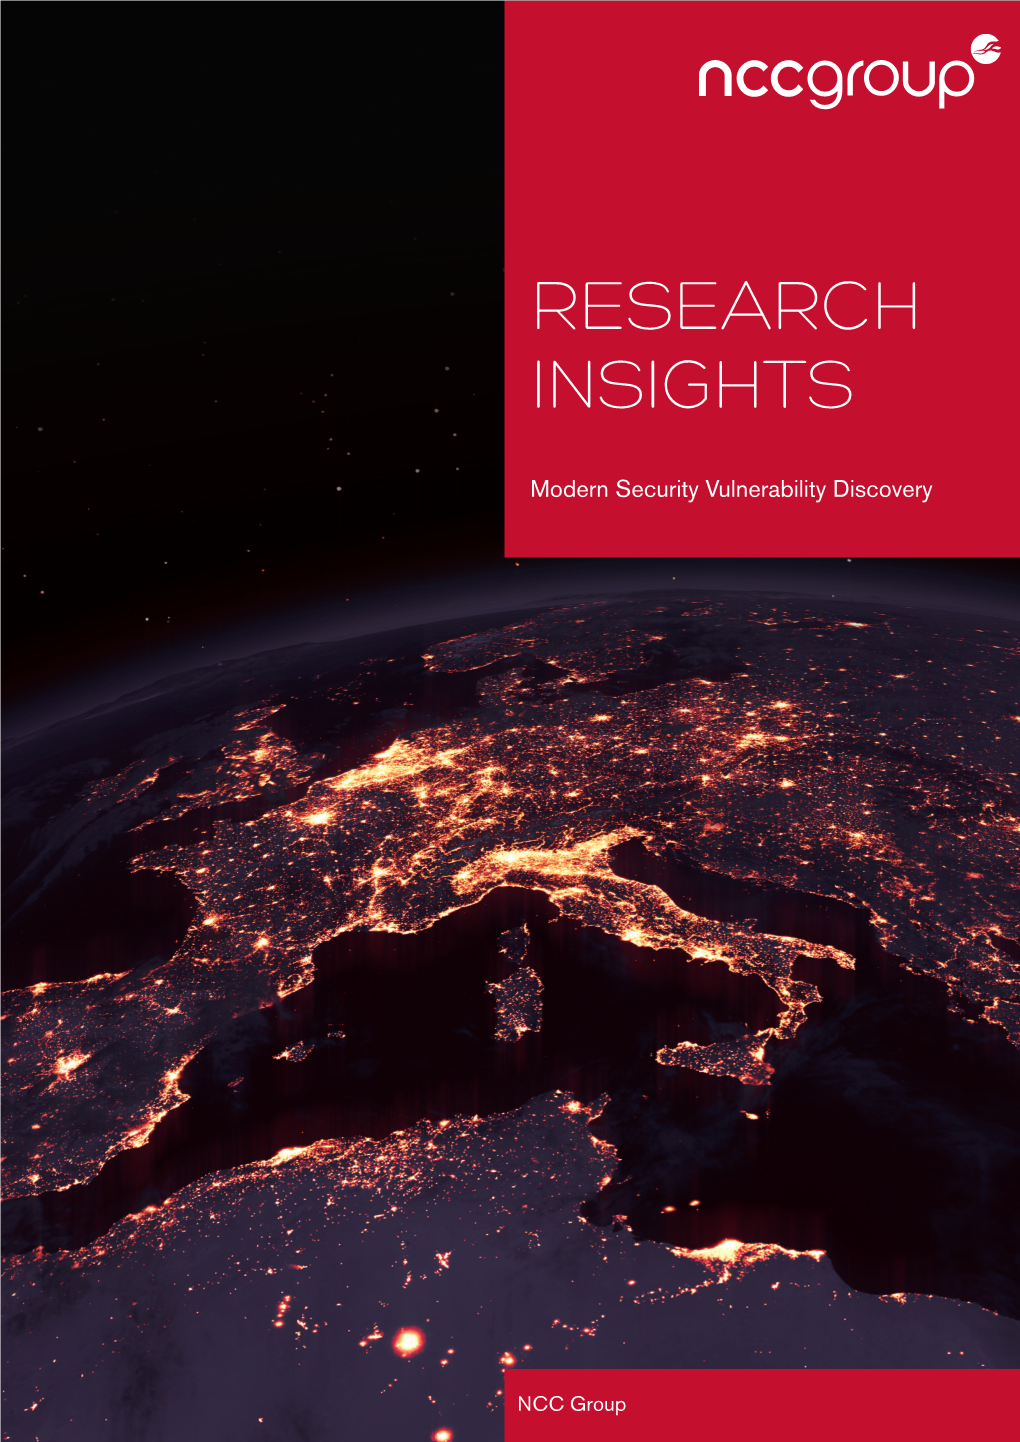 RESEARCH INSIGHTS – Modern Security Vulnerability Discovery